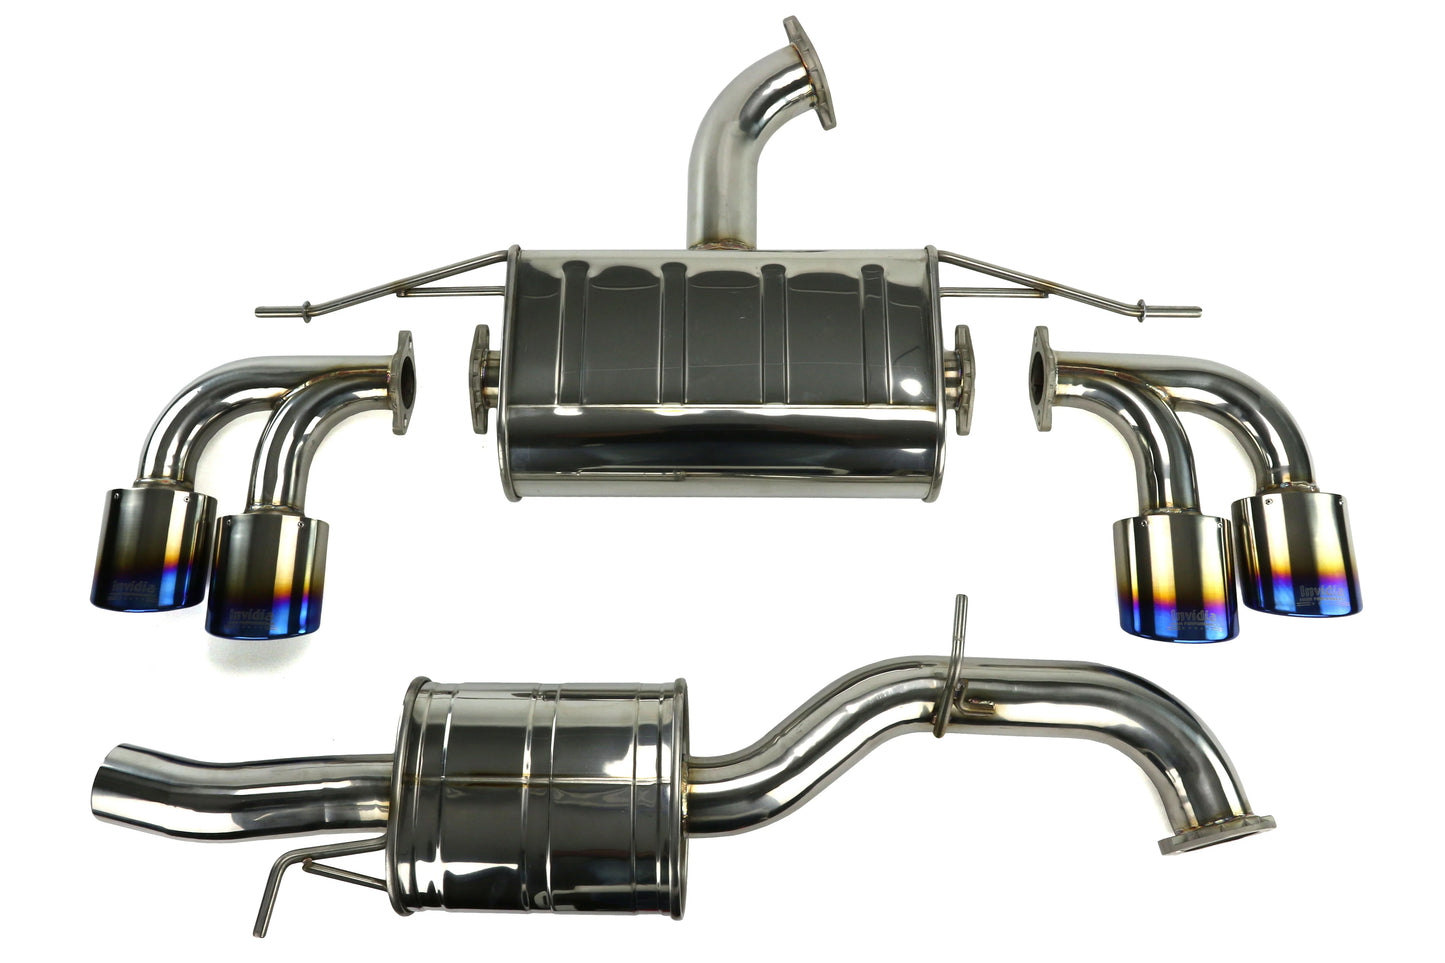 Q300 Non-Valved Turbo Back Exhaust w/Oval Tips - VW Golf R Mk7